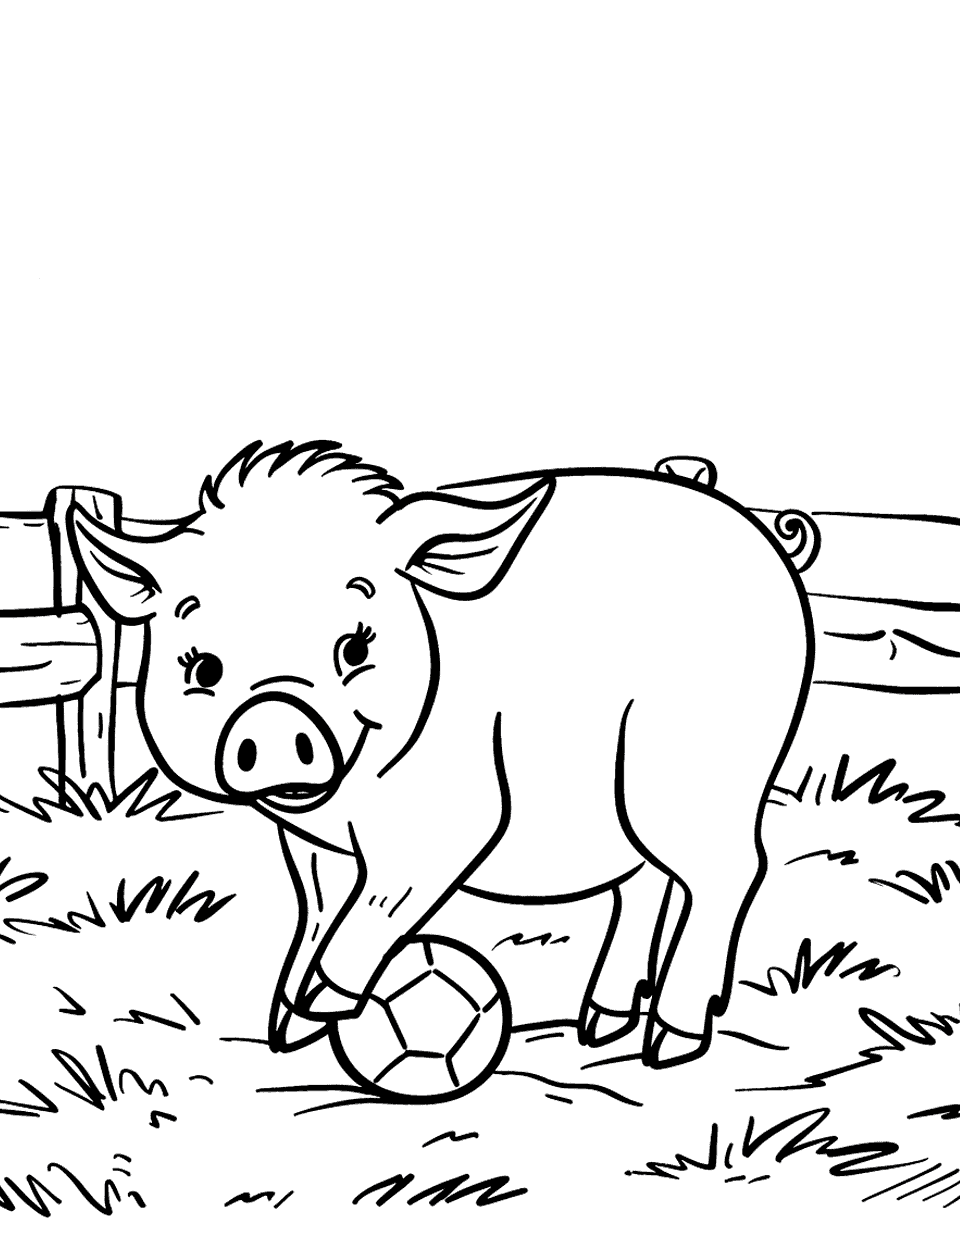 Piglet Playing with a Ball Farm Animal Coloring Page - A cute piglet playing with a small ball in the yard.